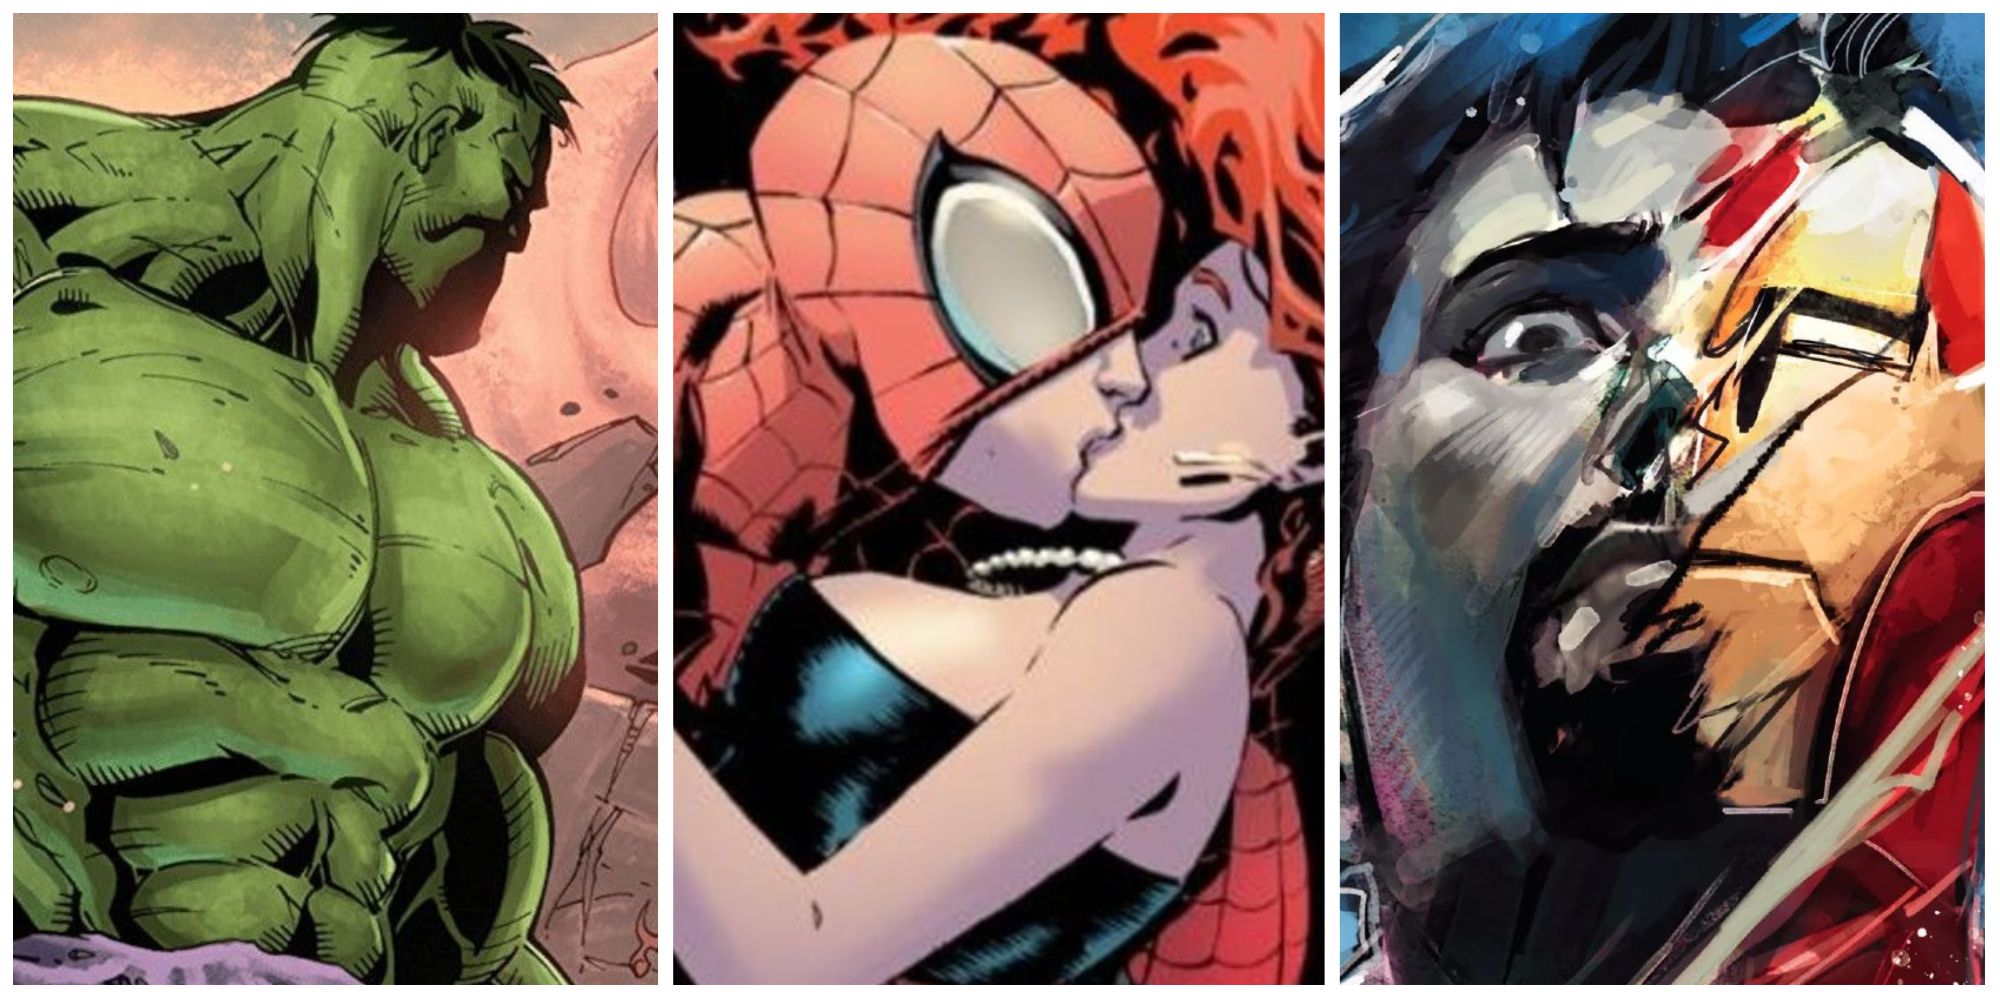 The Hulk (left), Spider-Man and Mary Jane (center), and Iron Man (right) all have dysfunctional family backgrounds.